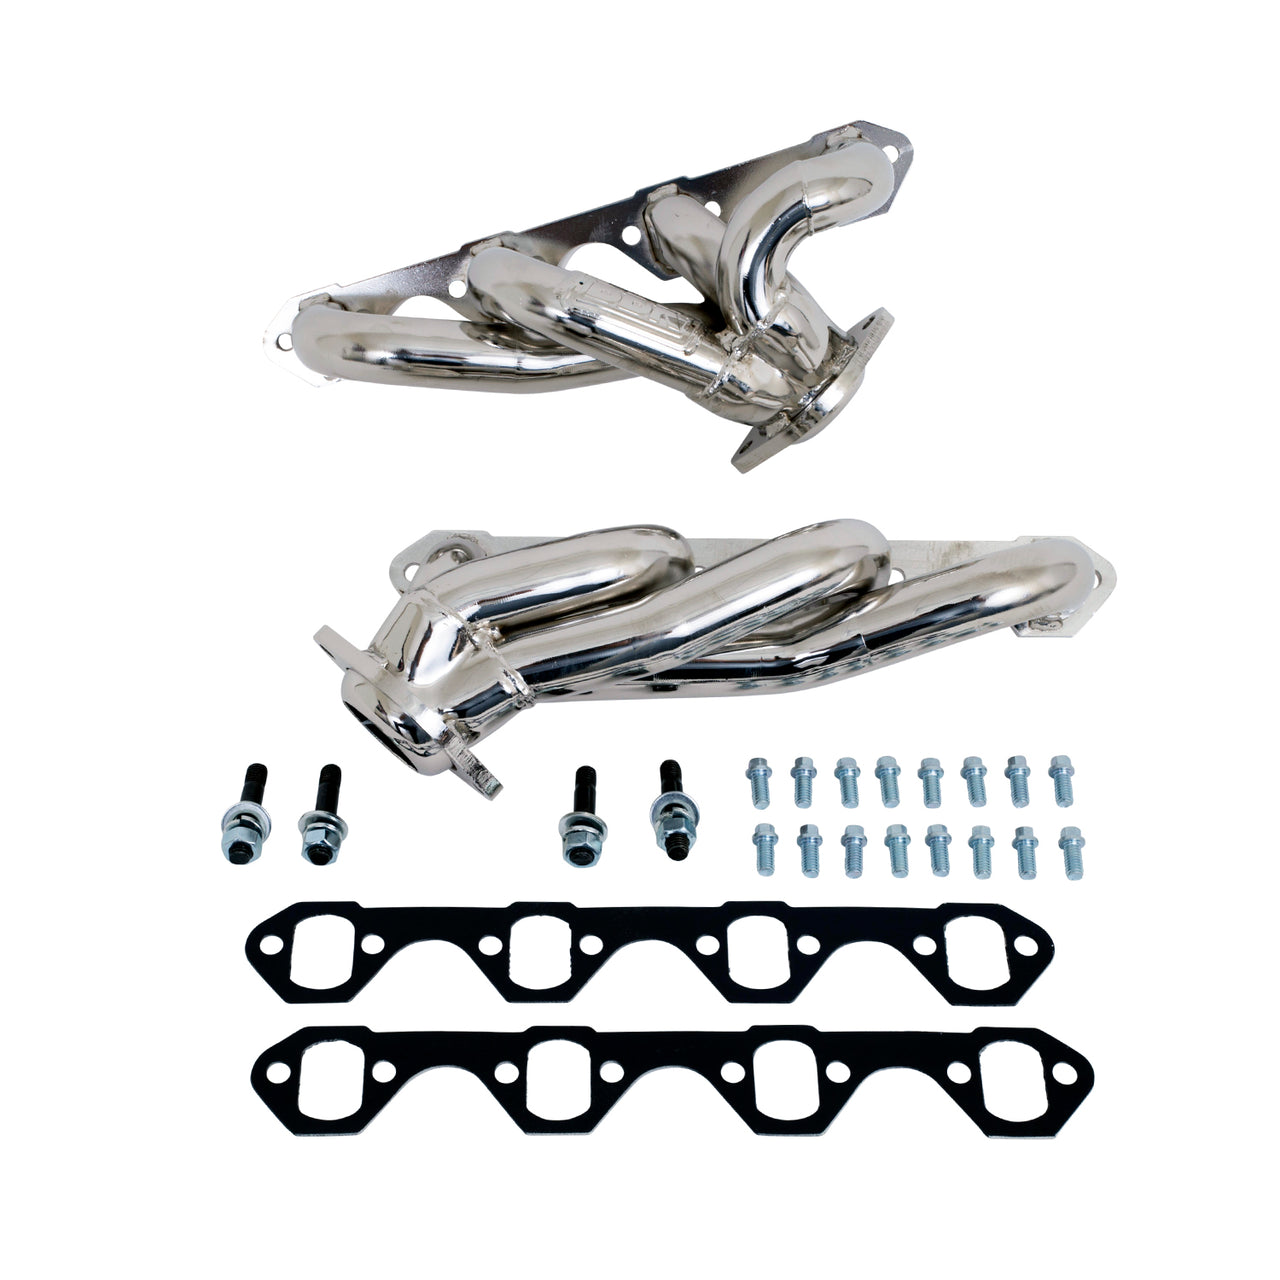 1987-1995 FORD F150 302 1-5/8 SHORTY HEADERS (CERAMIC)